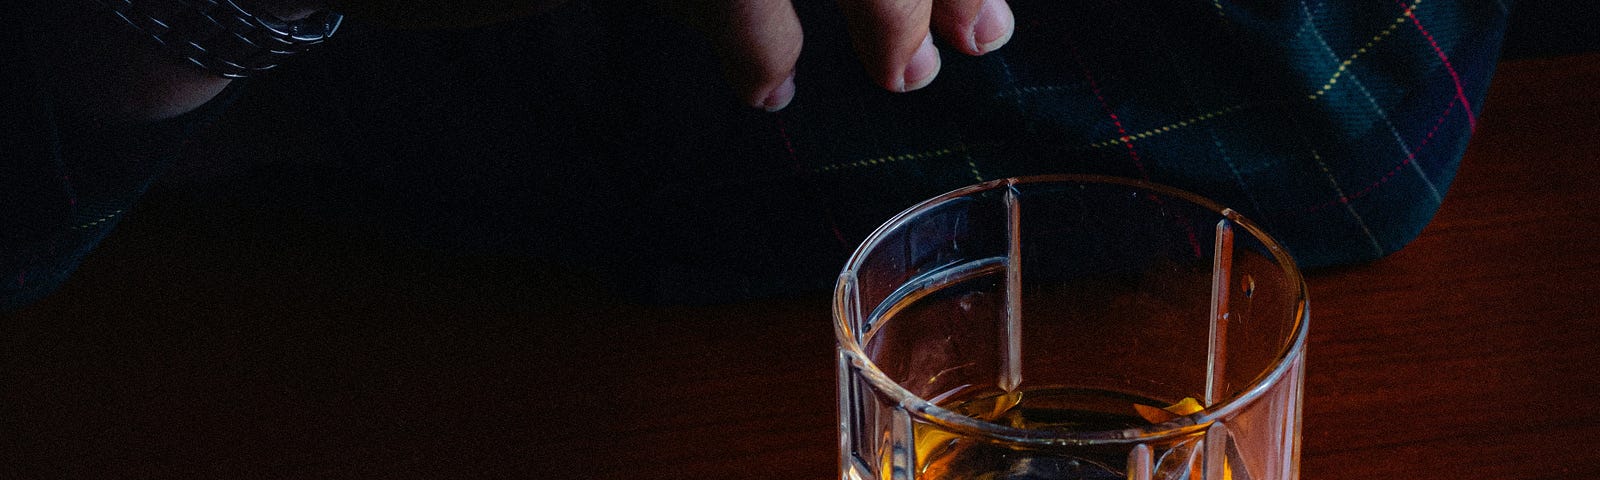 A man’s hand holding a cigarette over a glass of amber liquid at a bar.